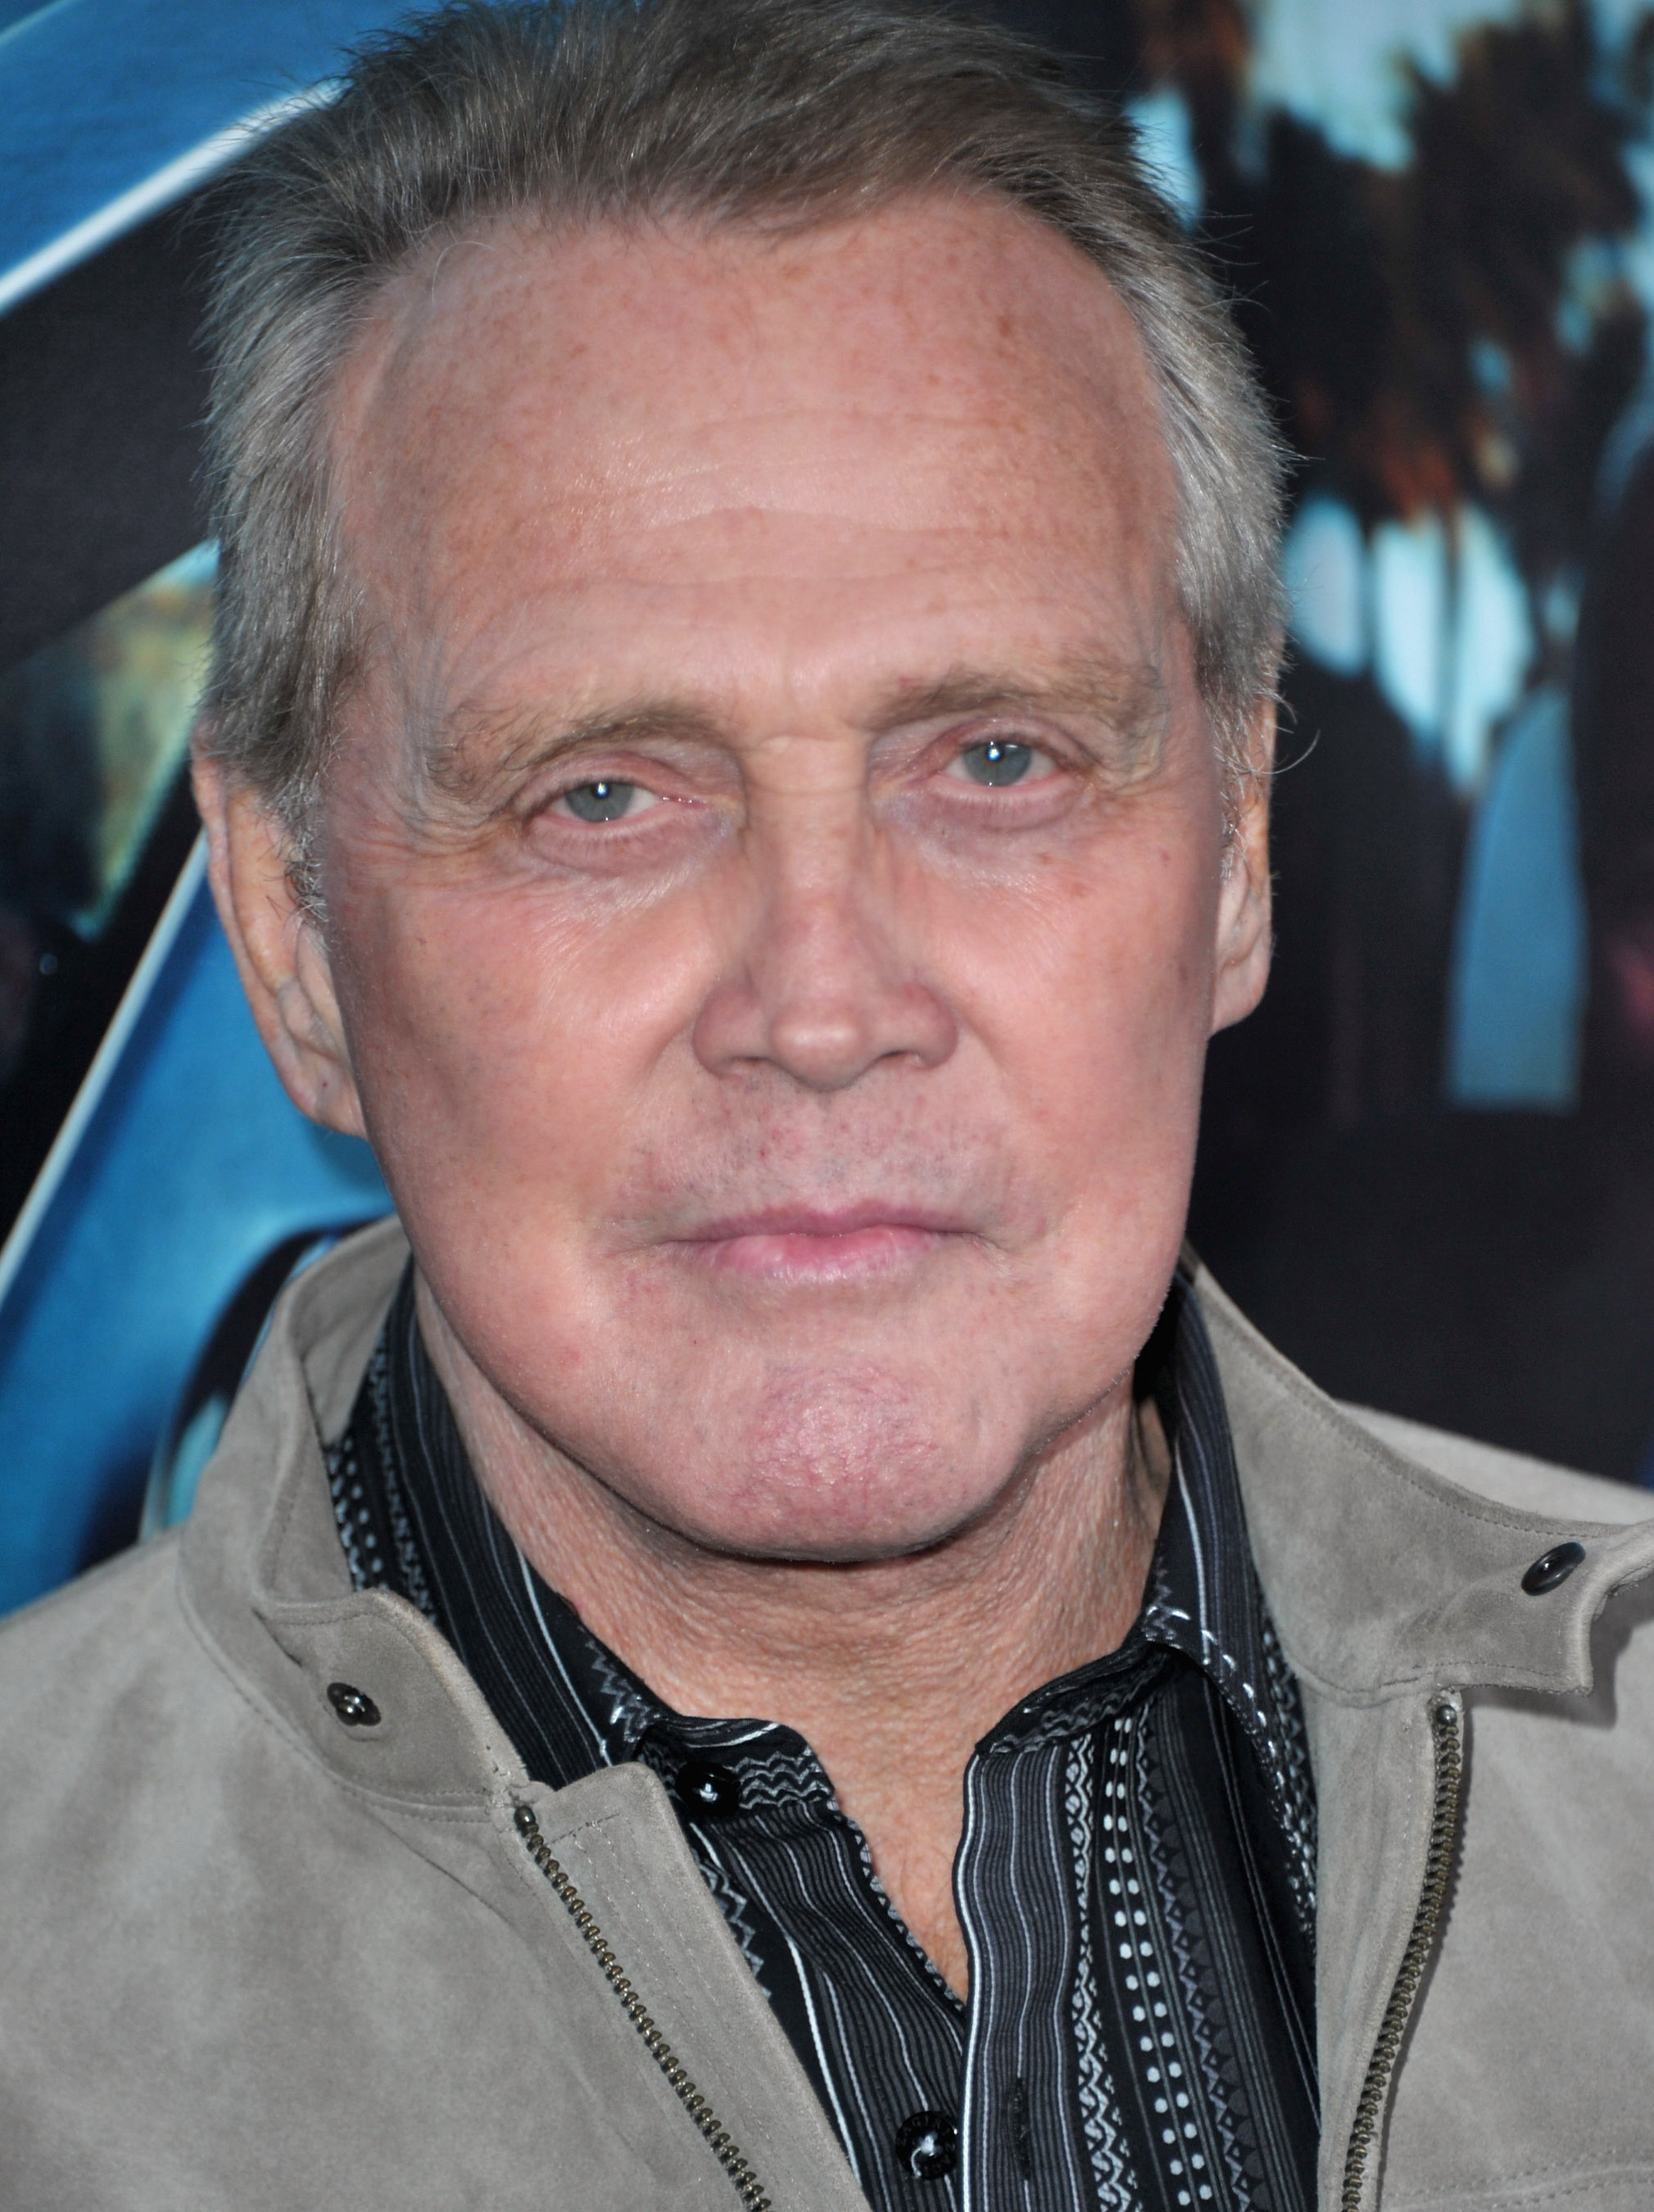 More Pictures Of Lee Majors. lee majors images. 